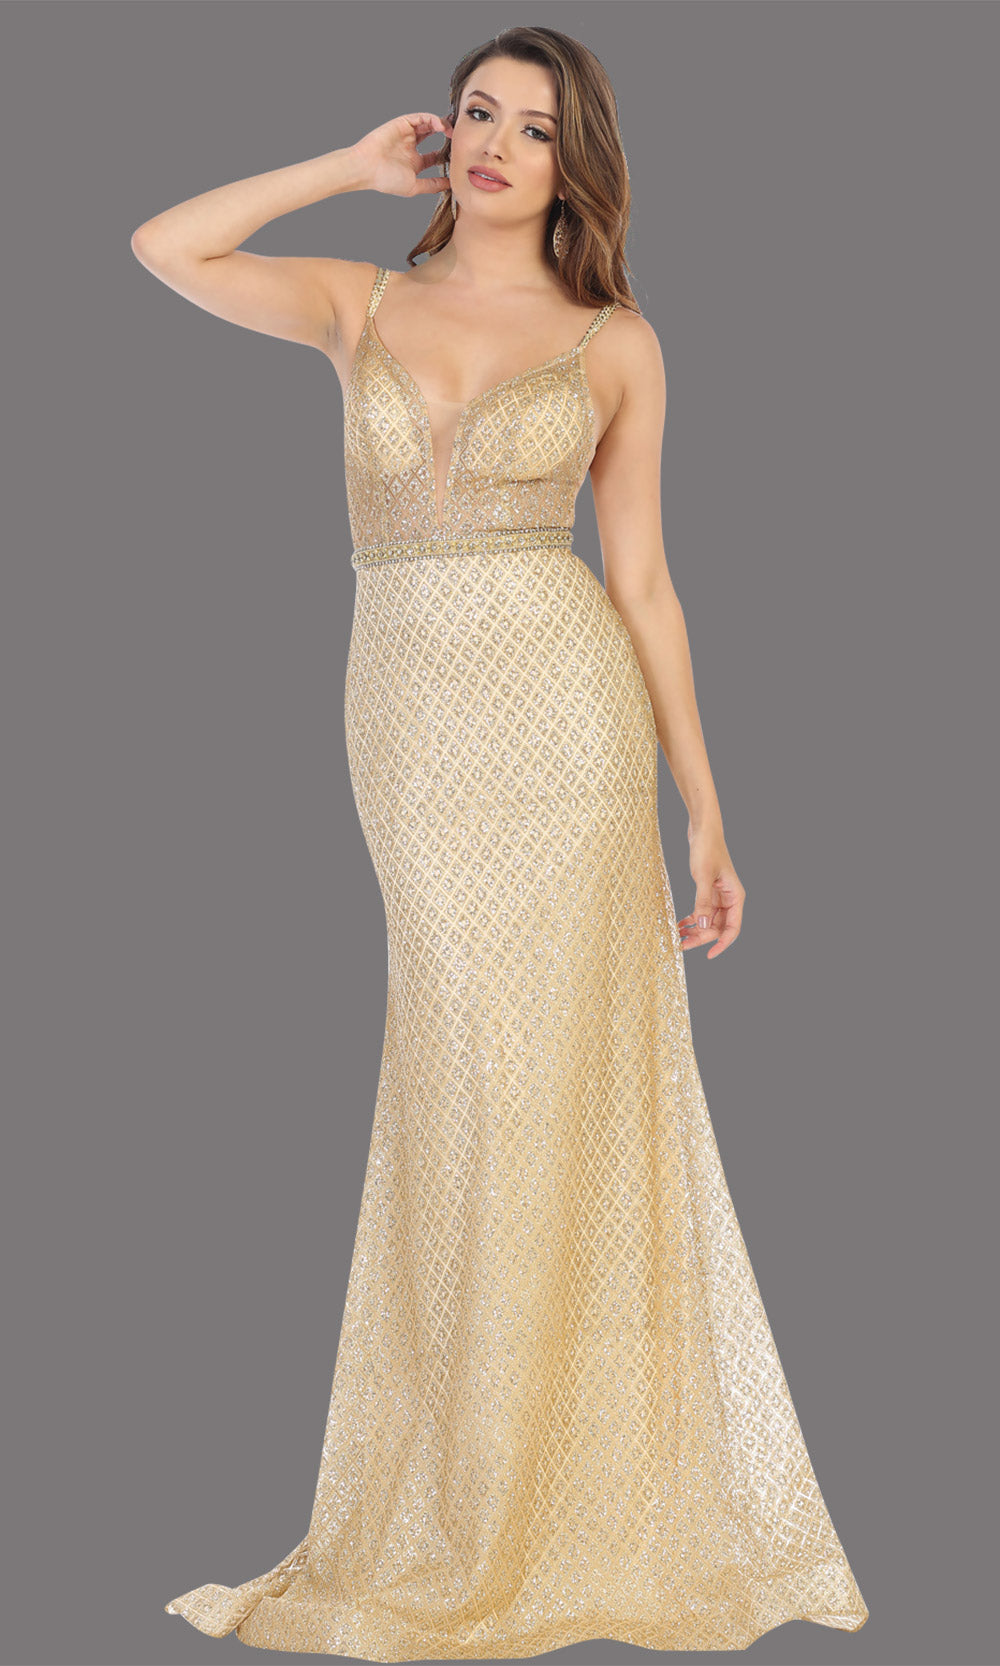 Mayqueen RQ7782 long gold v neck evening fitted sequin dress w/straps. Full length light gold gown is perfect for  enagagement/e-shoot dress, formal wedding guest, indowestern gown, evening party dress, prom, bridesmaid. Plus sizes avail.jpg